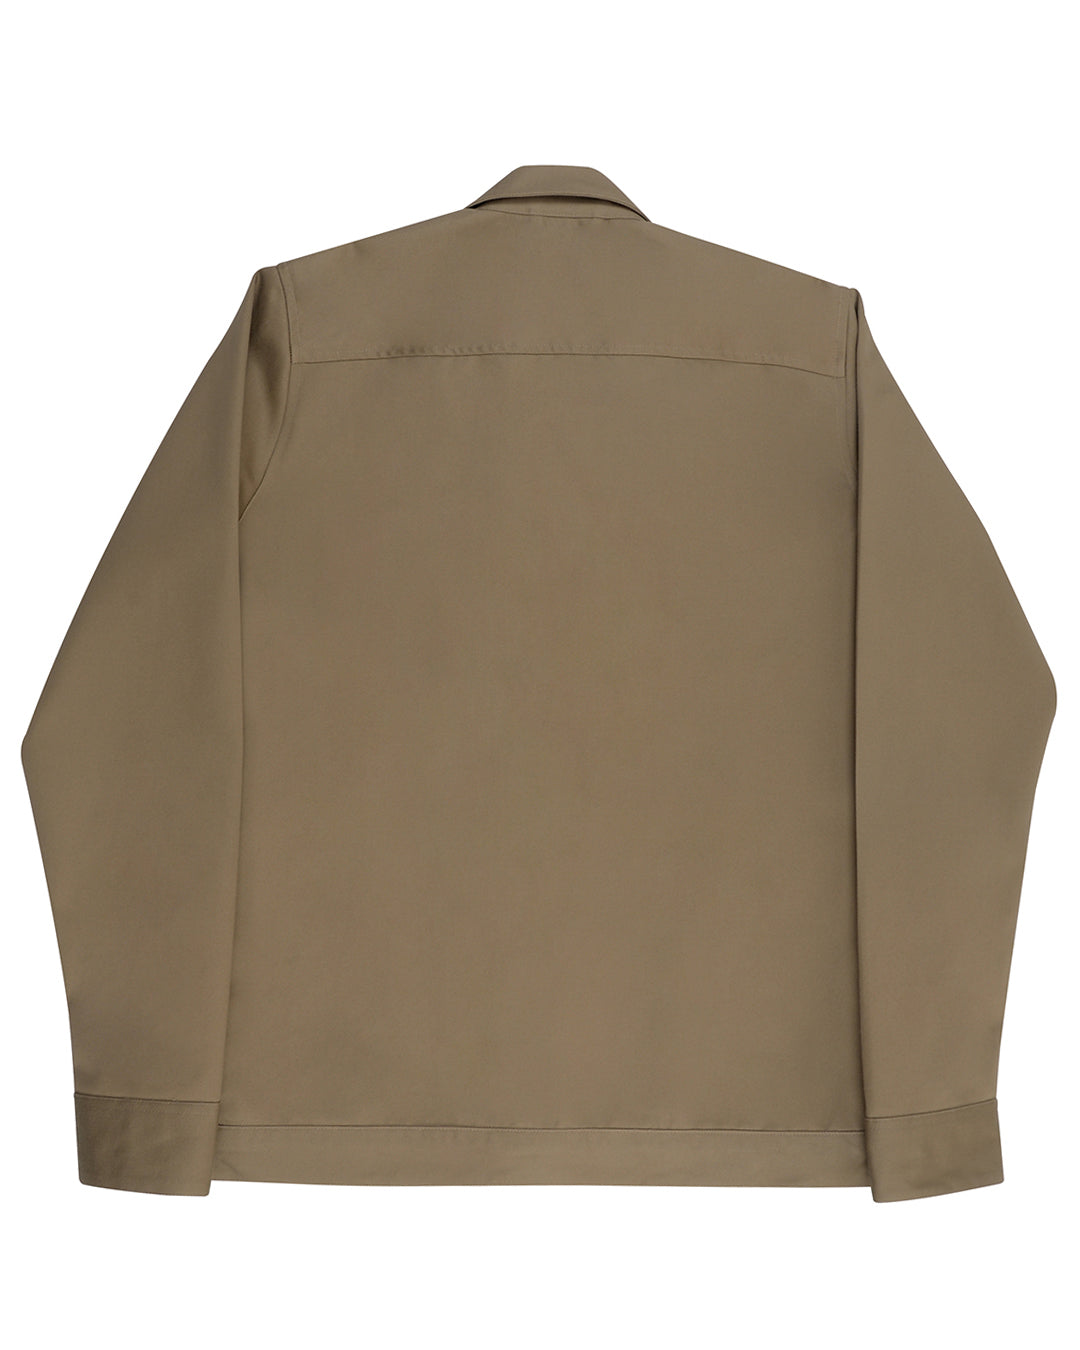 Back of the drab twill shirt jacket for men by Luxire